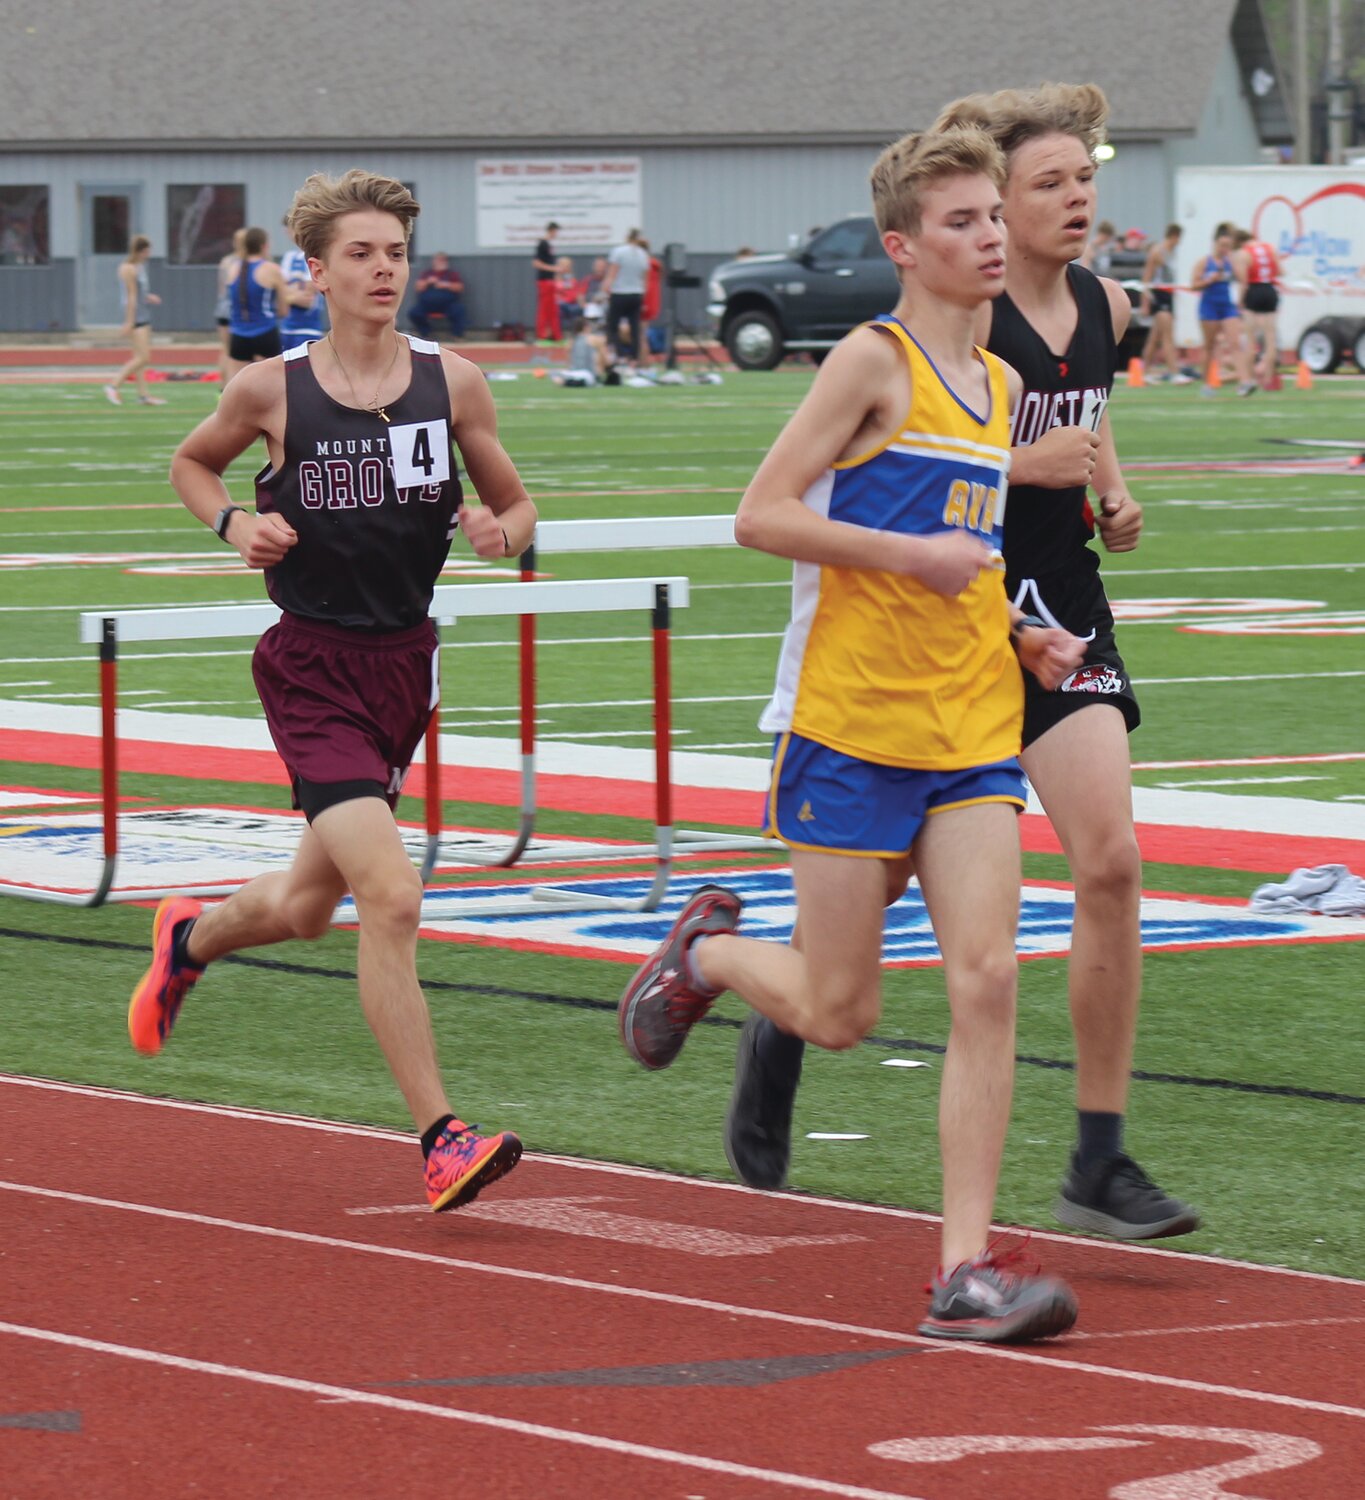 The Panthers’ Bryson Colson during the 1,600 meters race at last week’s Zizzer Relays in West plains.